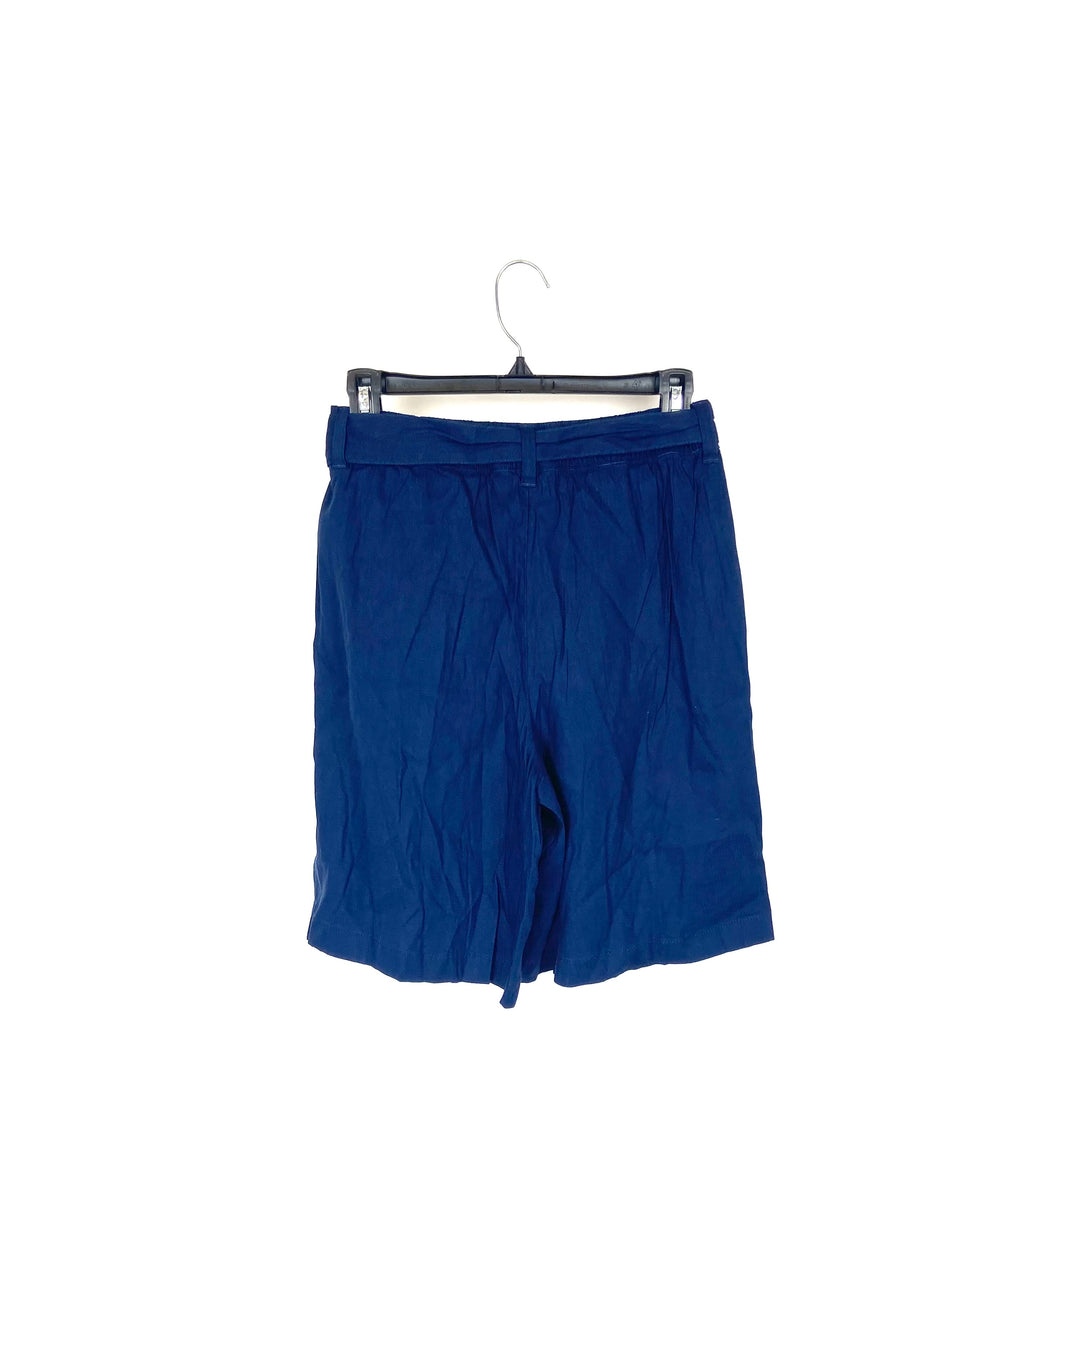 Navy Blue Shorts with Bow Accent Belt - Size 4